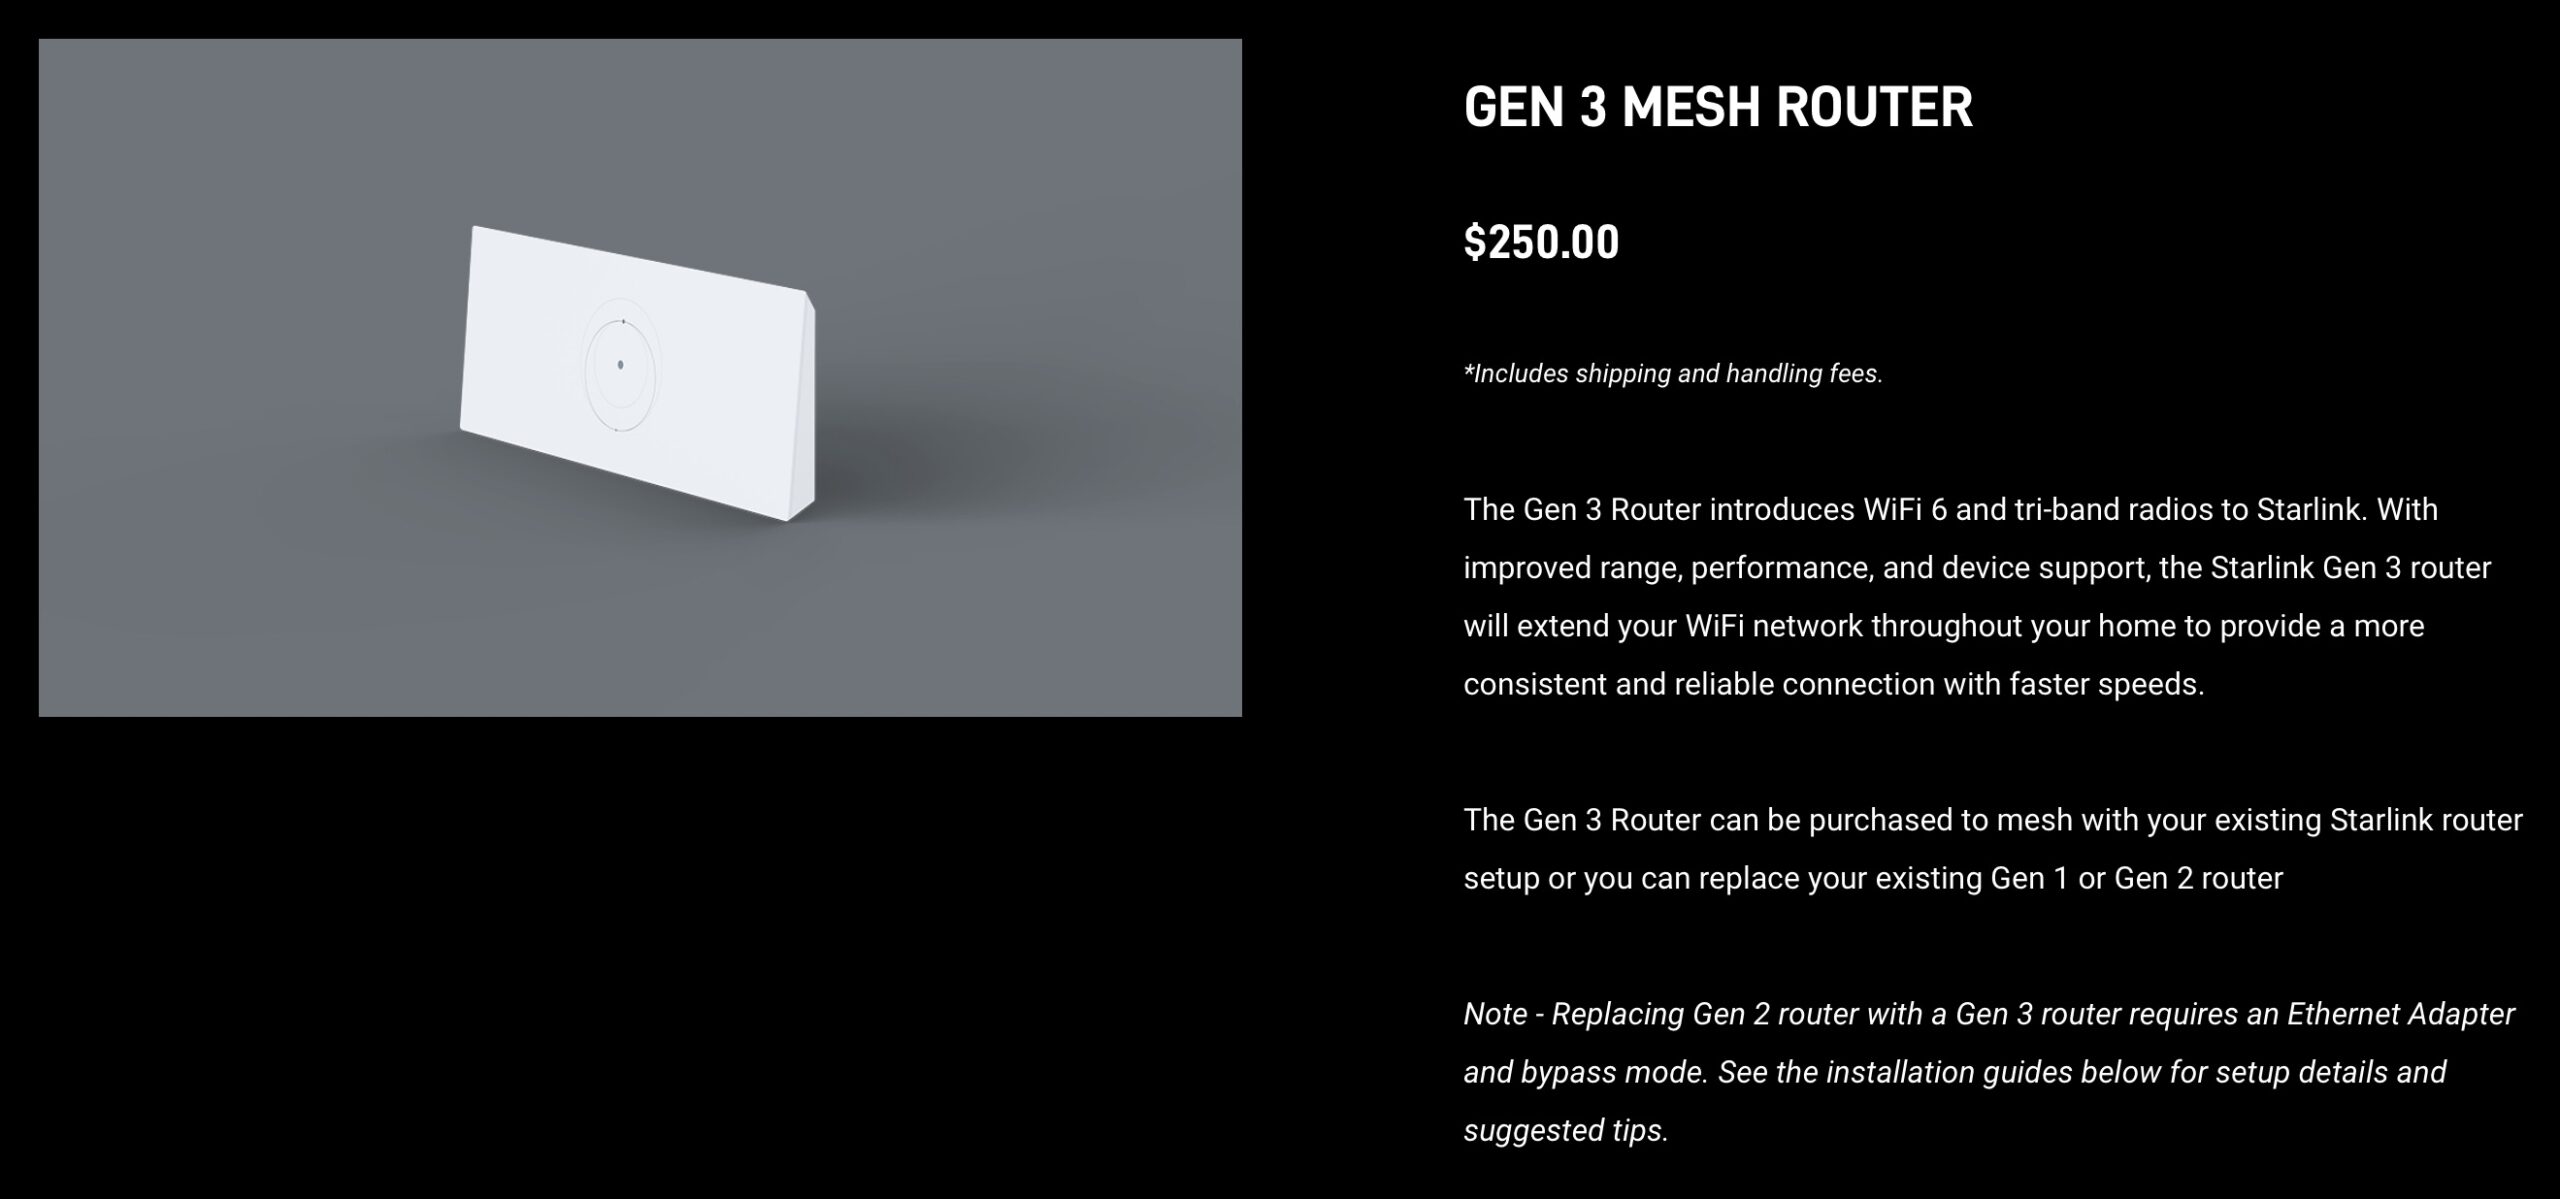 Starlink Gen 3 Mesh Router product page